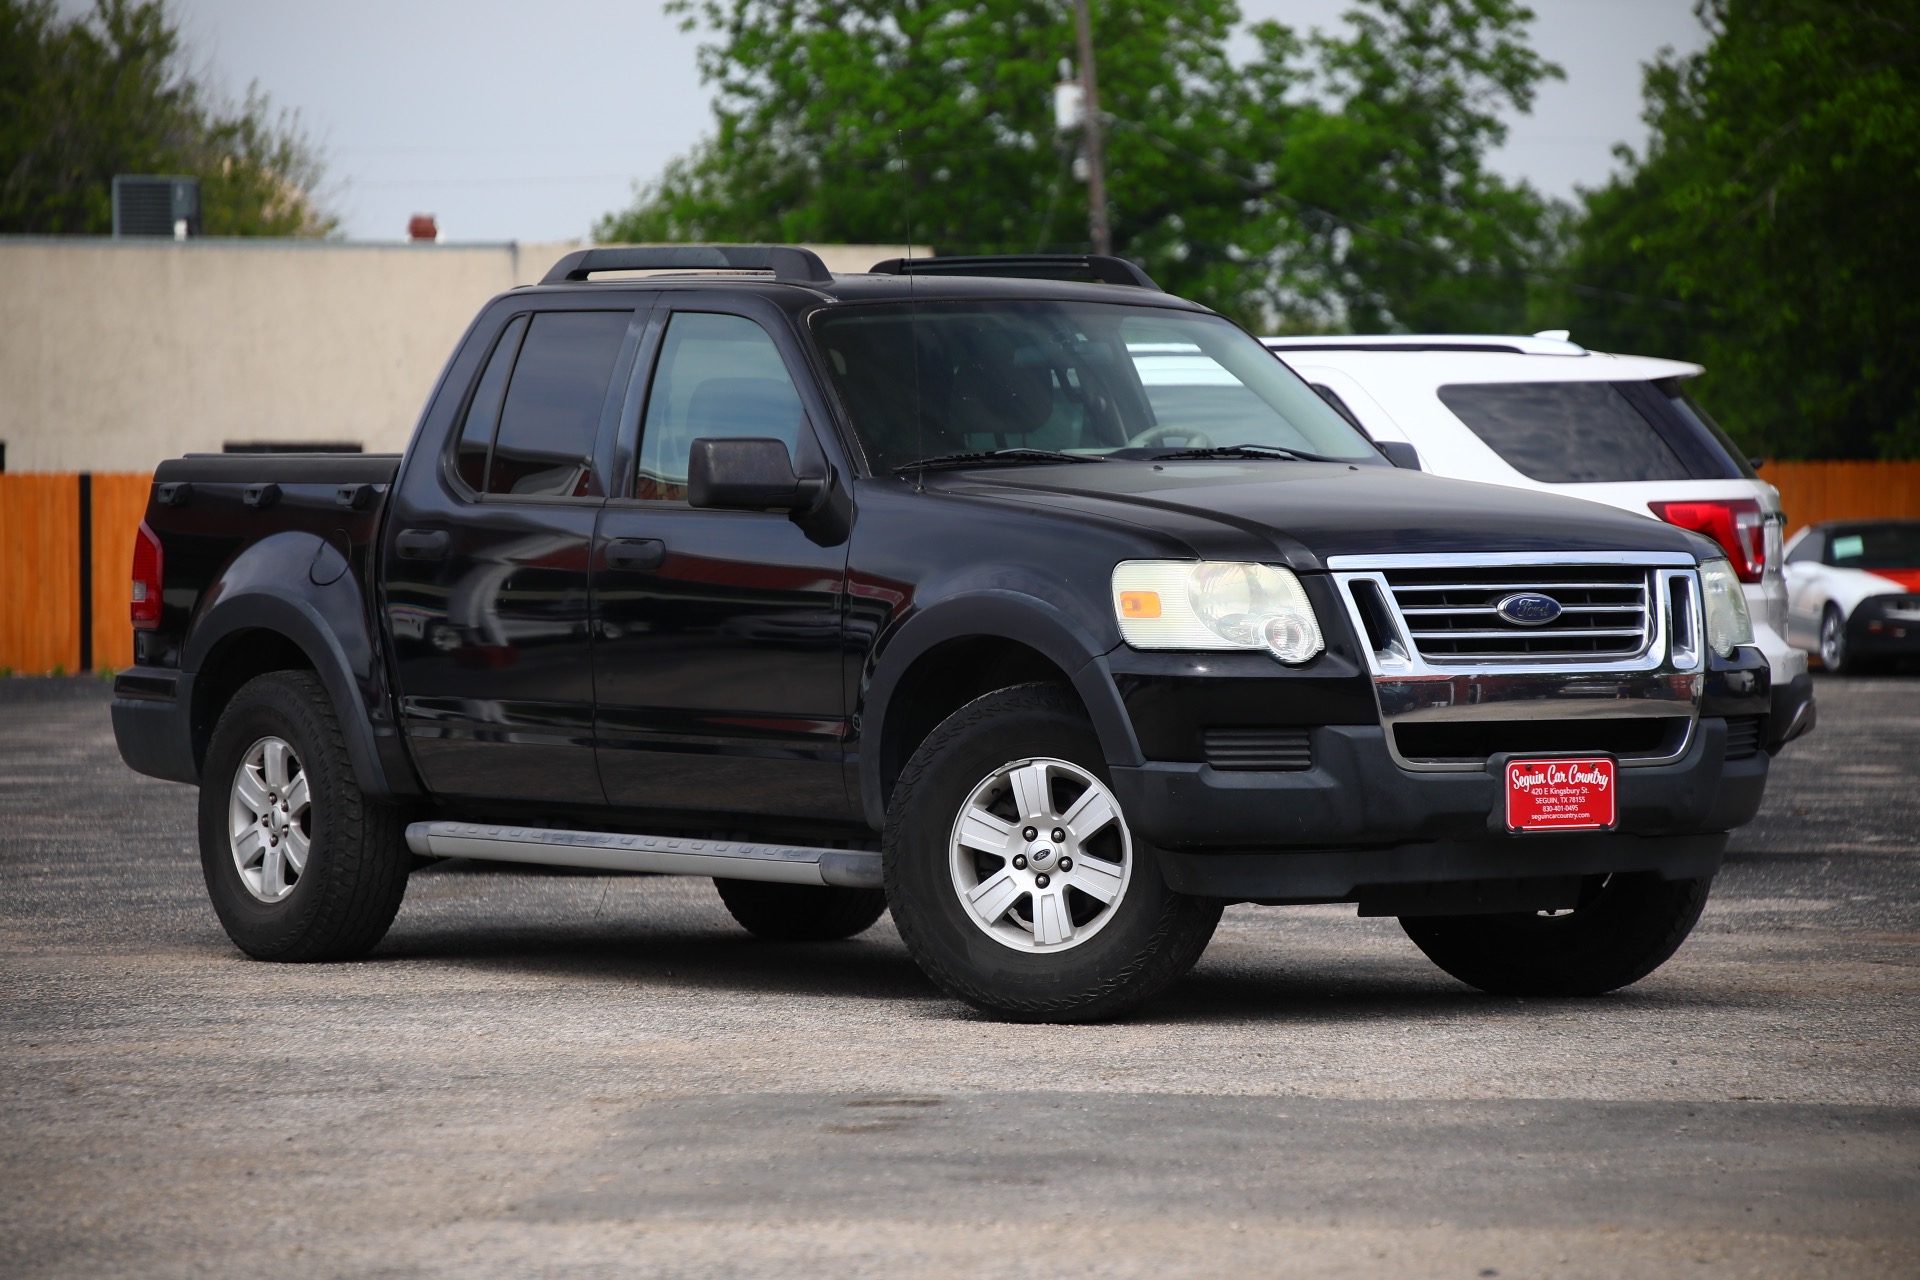 photo of 2007 FORD EXPLORER SPORT TRAC SUV TRUCK 4-DR